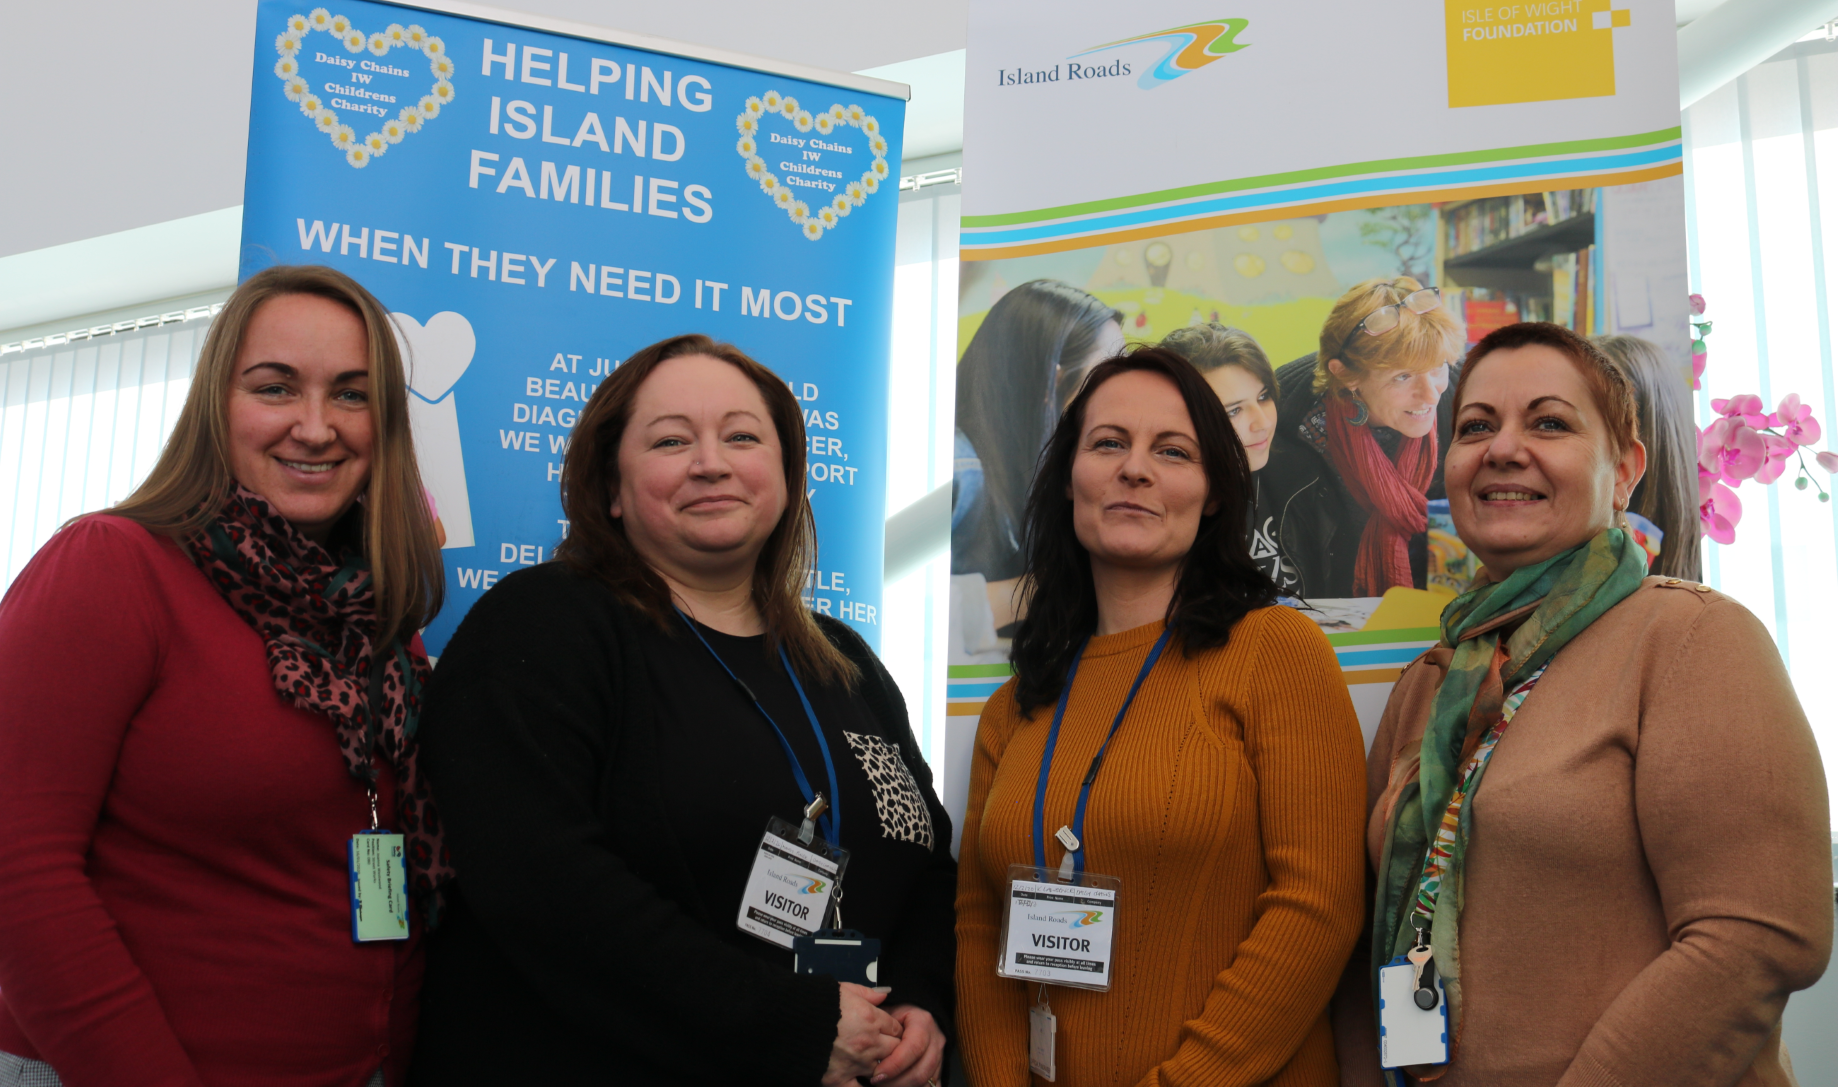 Photo showing four people, two from Daisy Chains charity, two from Island Roads, in front of colourful banners promoting the charity and the IW Foundation